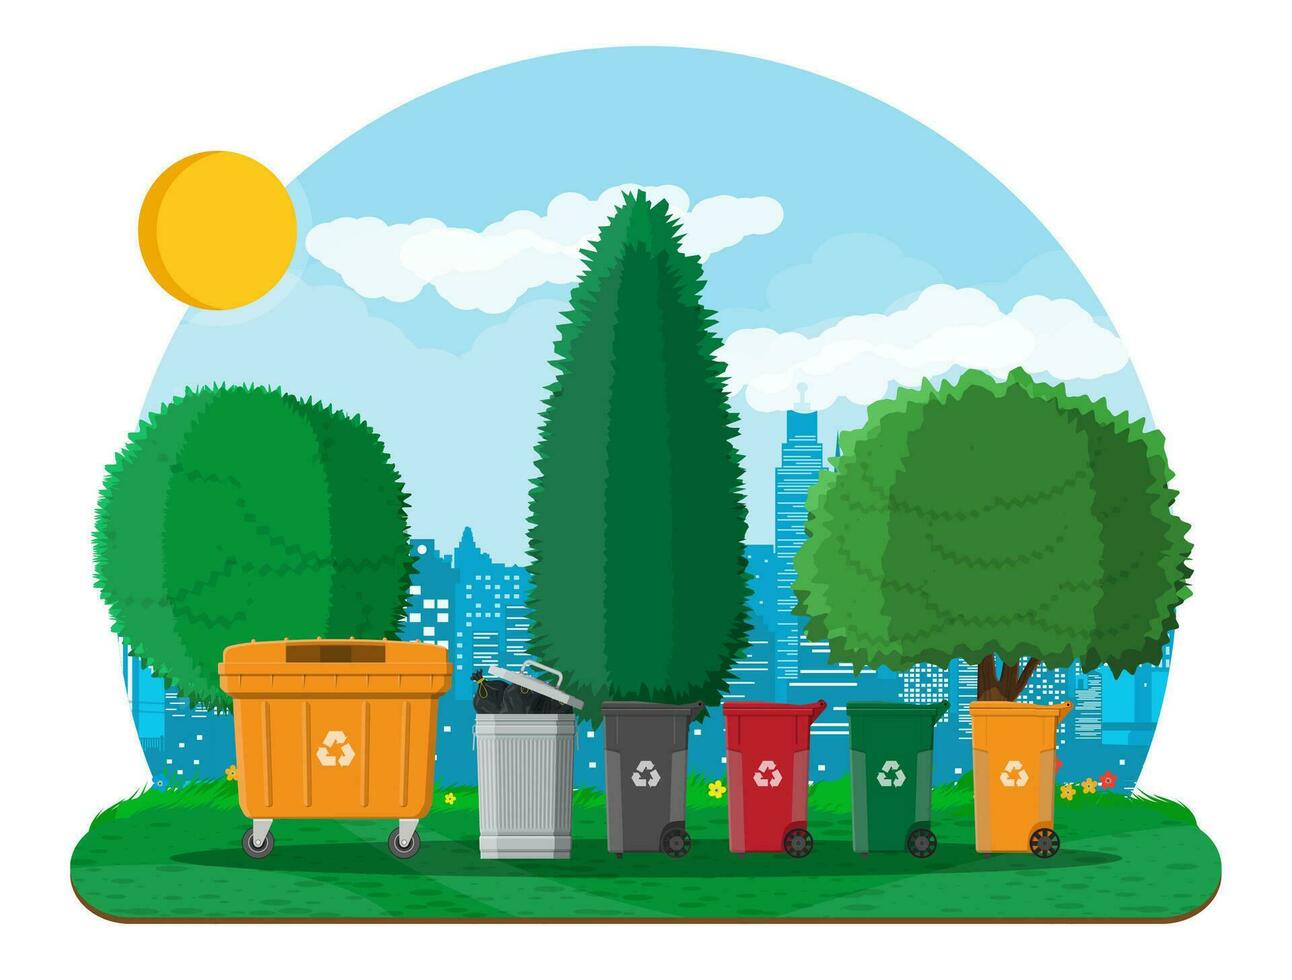 Ecological lifestyle concept. Can container, bag and bucket for garbage. Recycling and utilization equipment. Urban cityscape with trees. Green city. Vector illustration in flat style